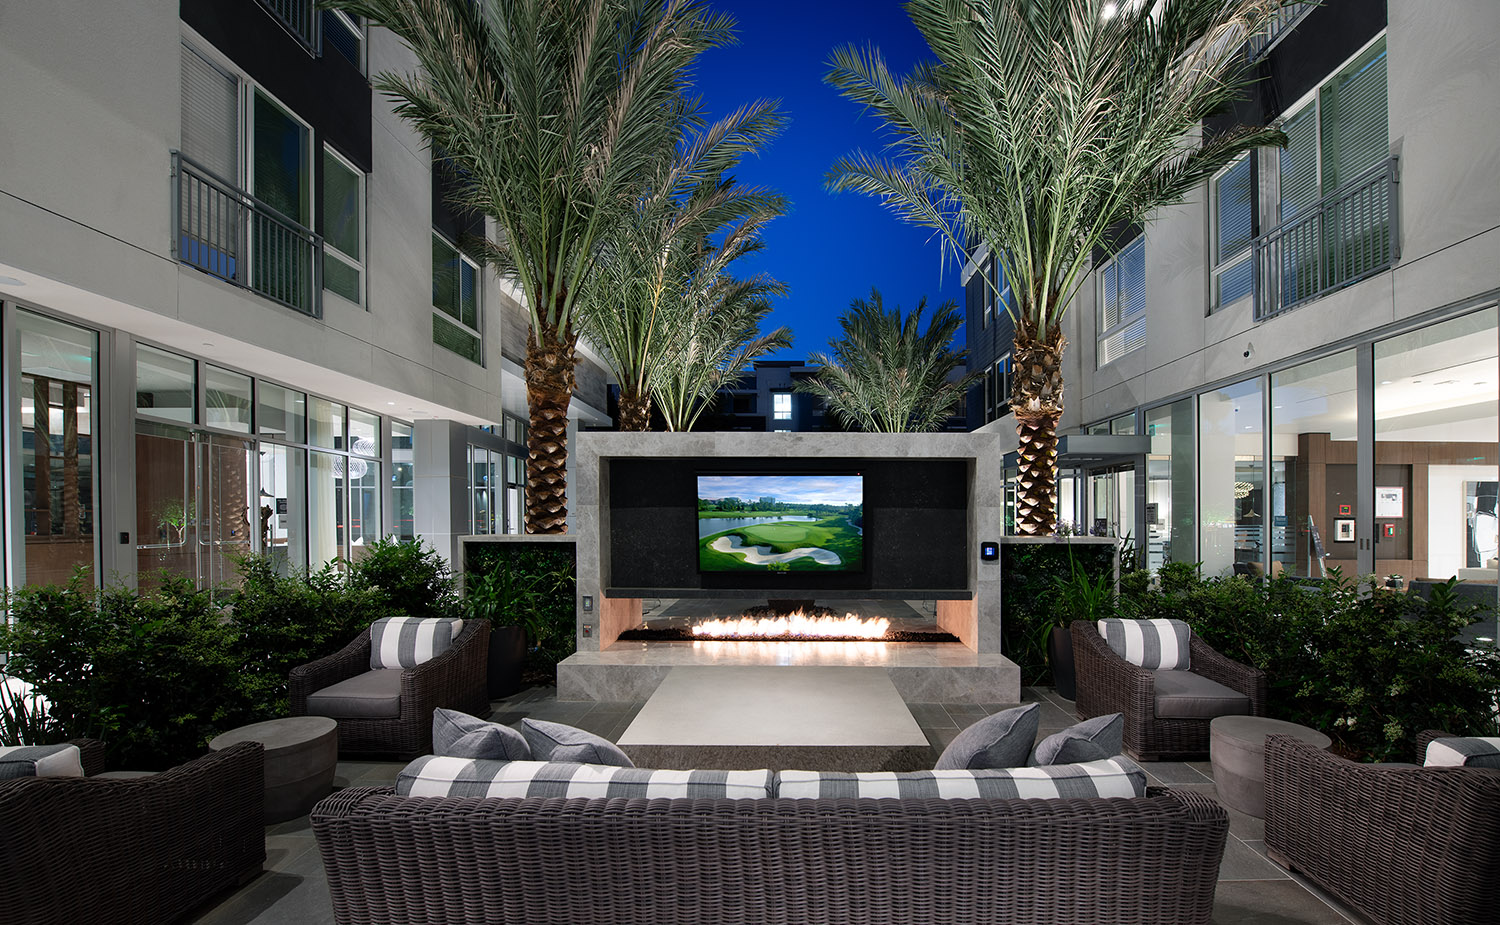 Outdoor fire put with flat screen TV and plush seating, surrounded by landscaping